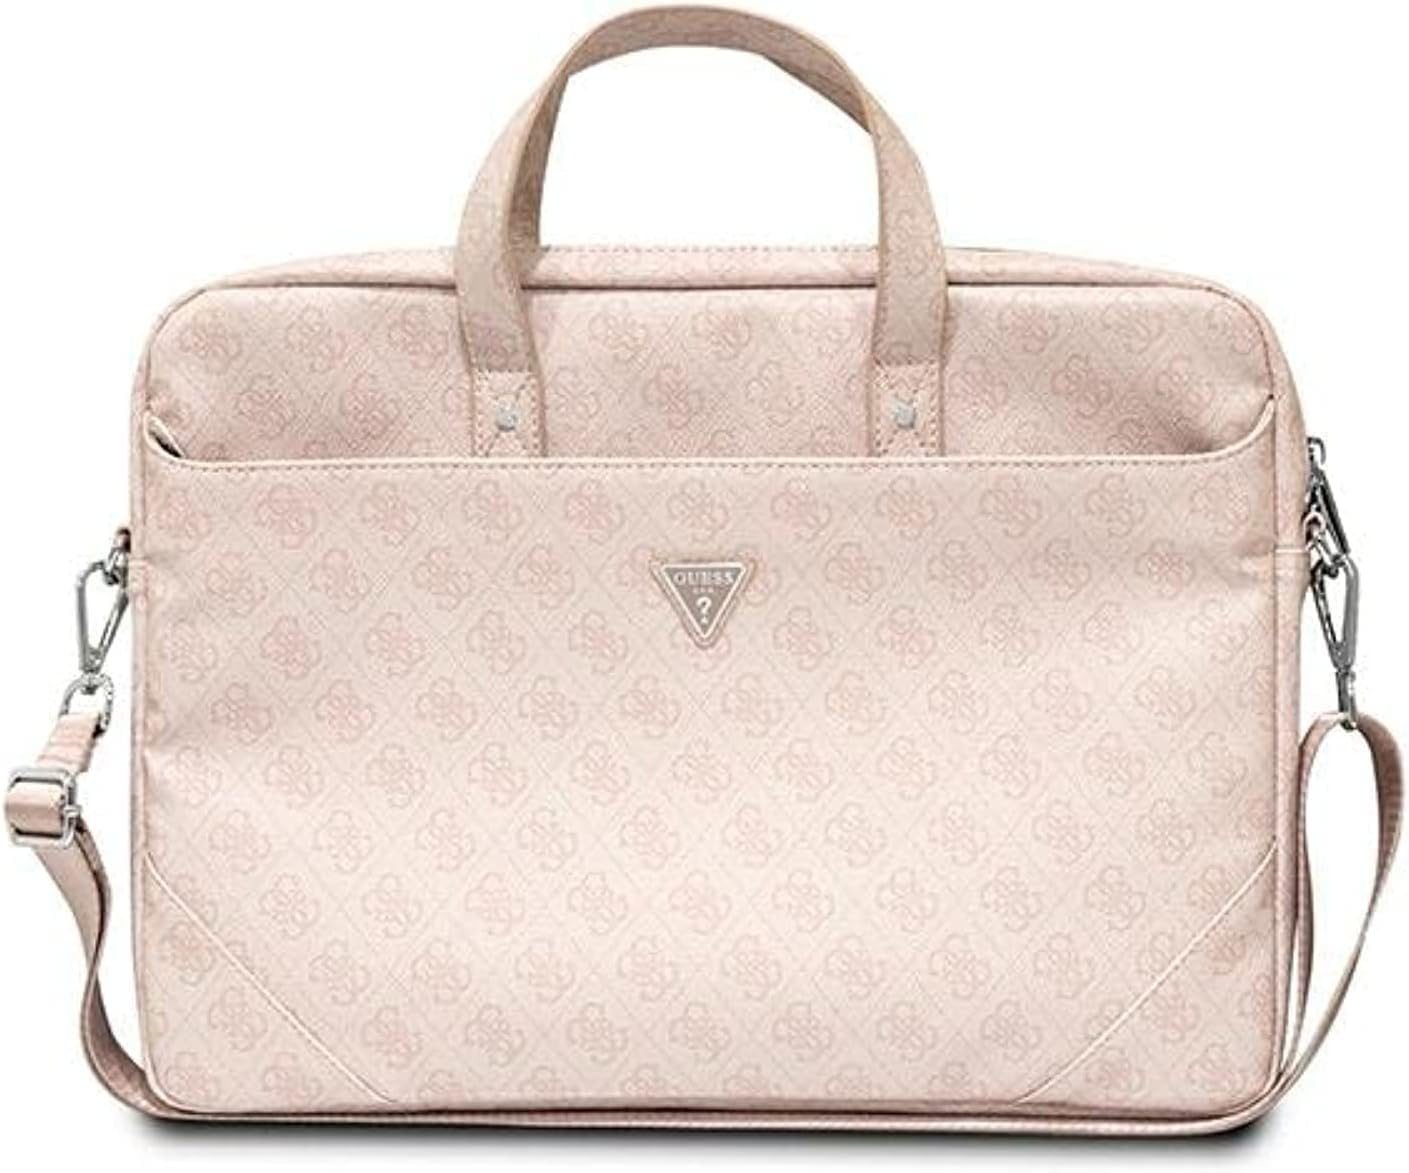 GUESS Unisex Saffiano 4g Hot Stamp Triangle Logo Tasche, Rosa